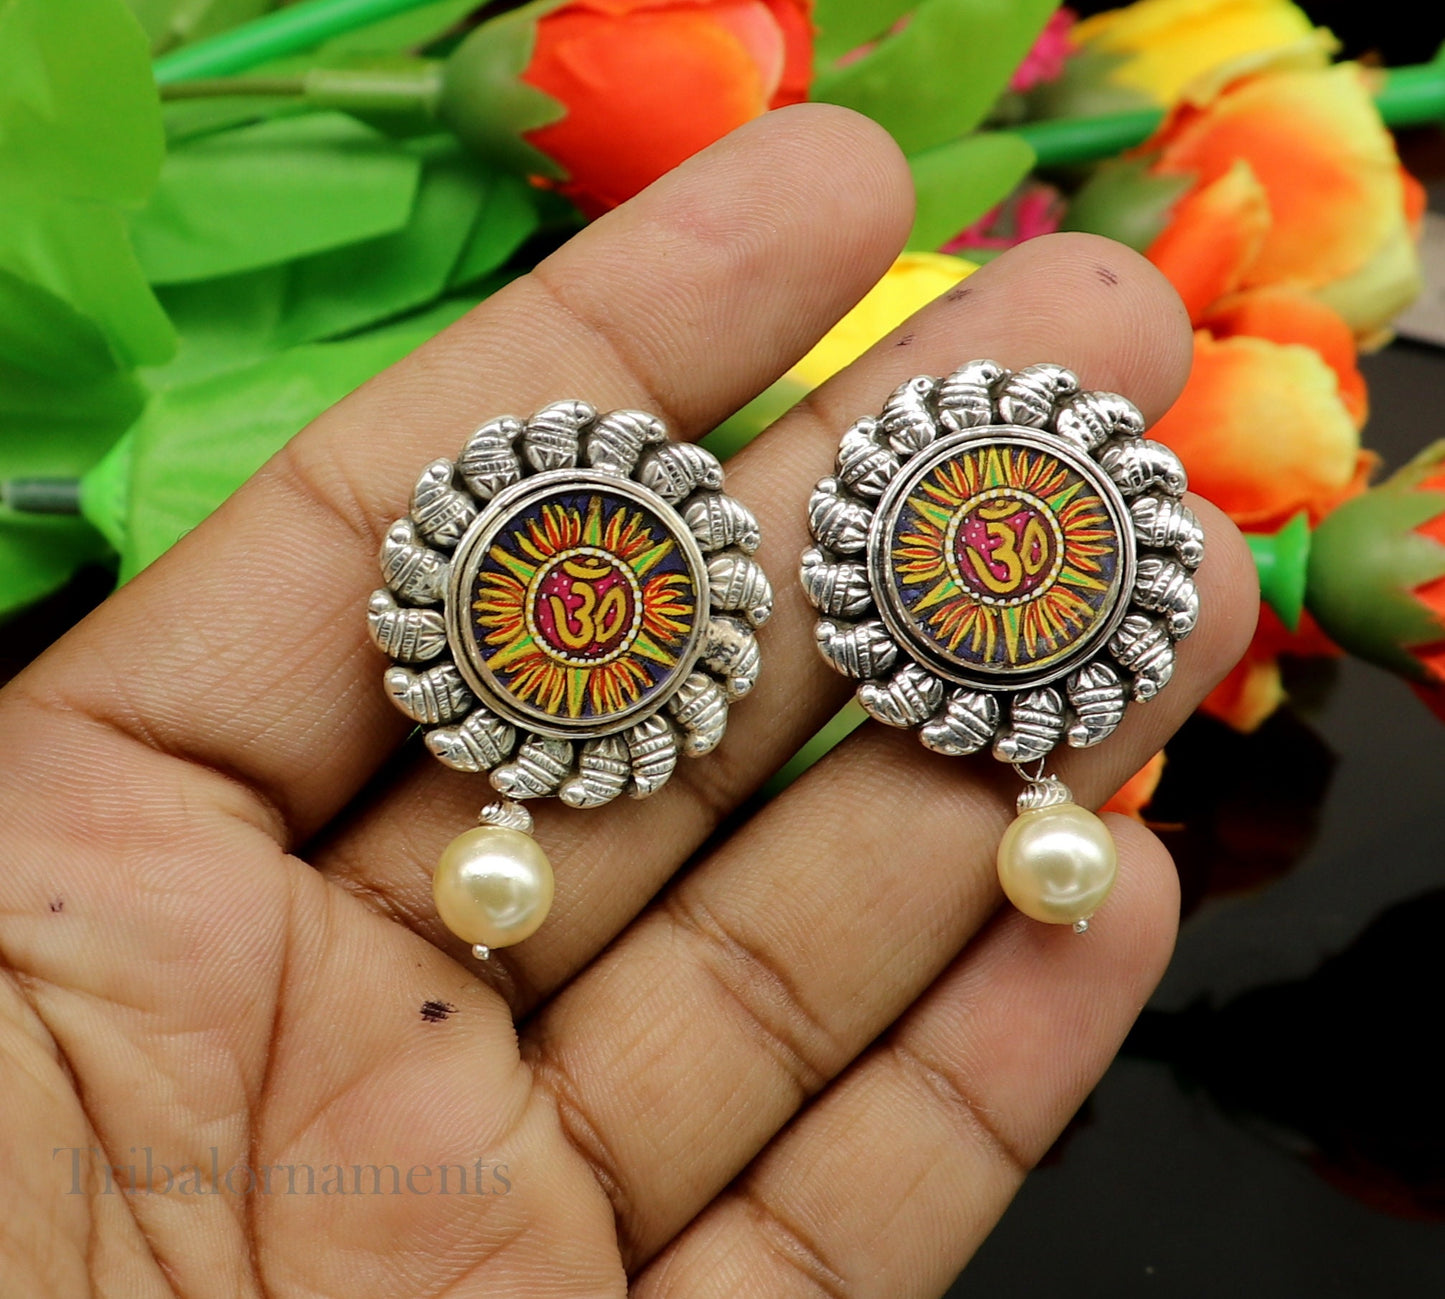 Divine Mantra "Aum' OM Stud earring Hand Painted Miniature Art photo Glass Framed 92.5 Sterling Silver ethnic earring stylish jewelry ear939 - TRIBAL ORNAMENTS